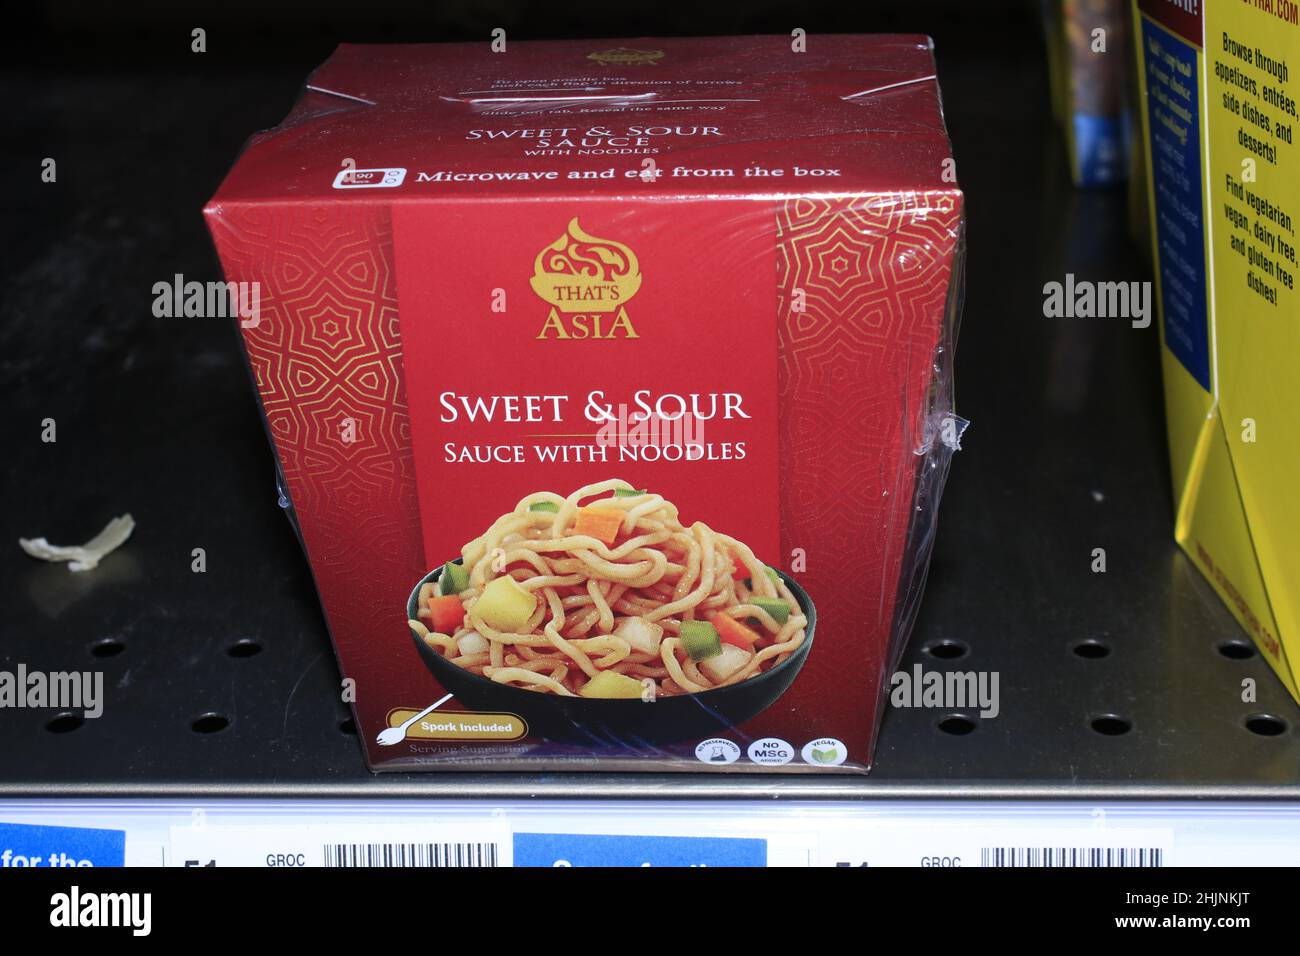 A closeup of THAT'S ASIA SWEET & SOUR SAUCE WITH NOODLES in a red box on a metal shelf at a Dillons grocery store in Kansas Stock Photo